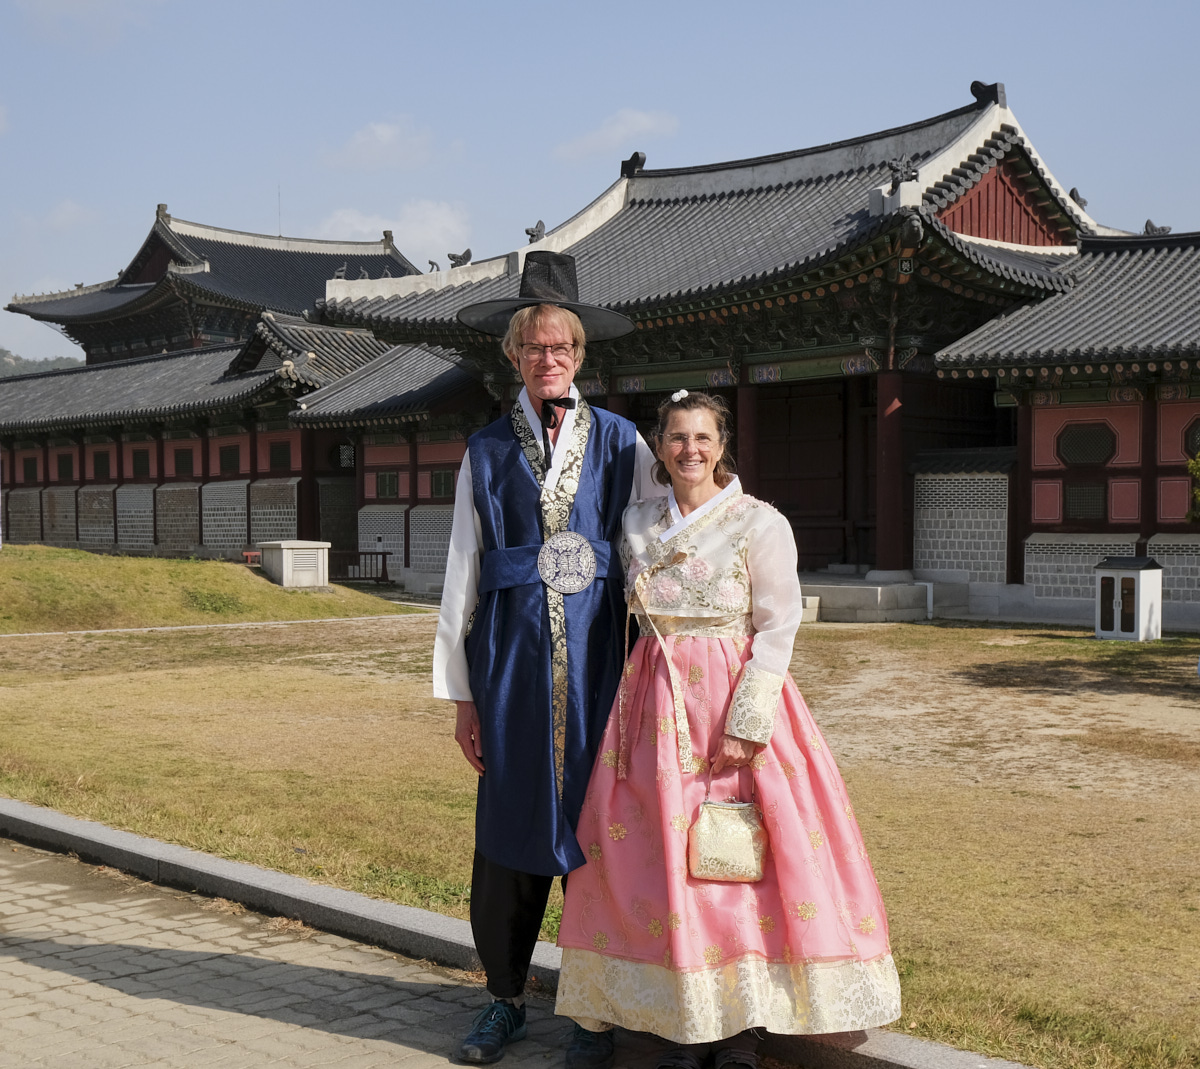 Deb and Tim in traditional Hanbok clothing